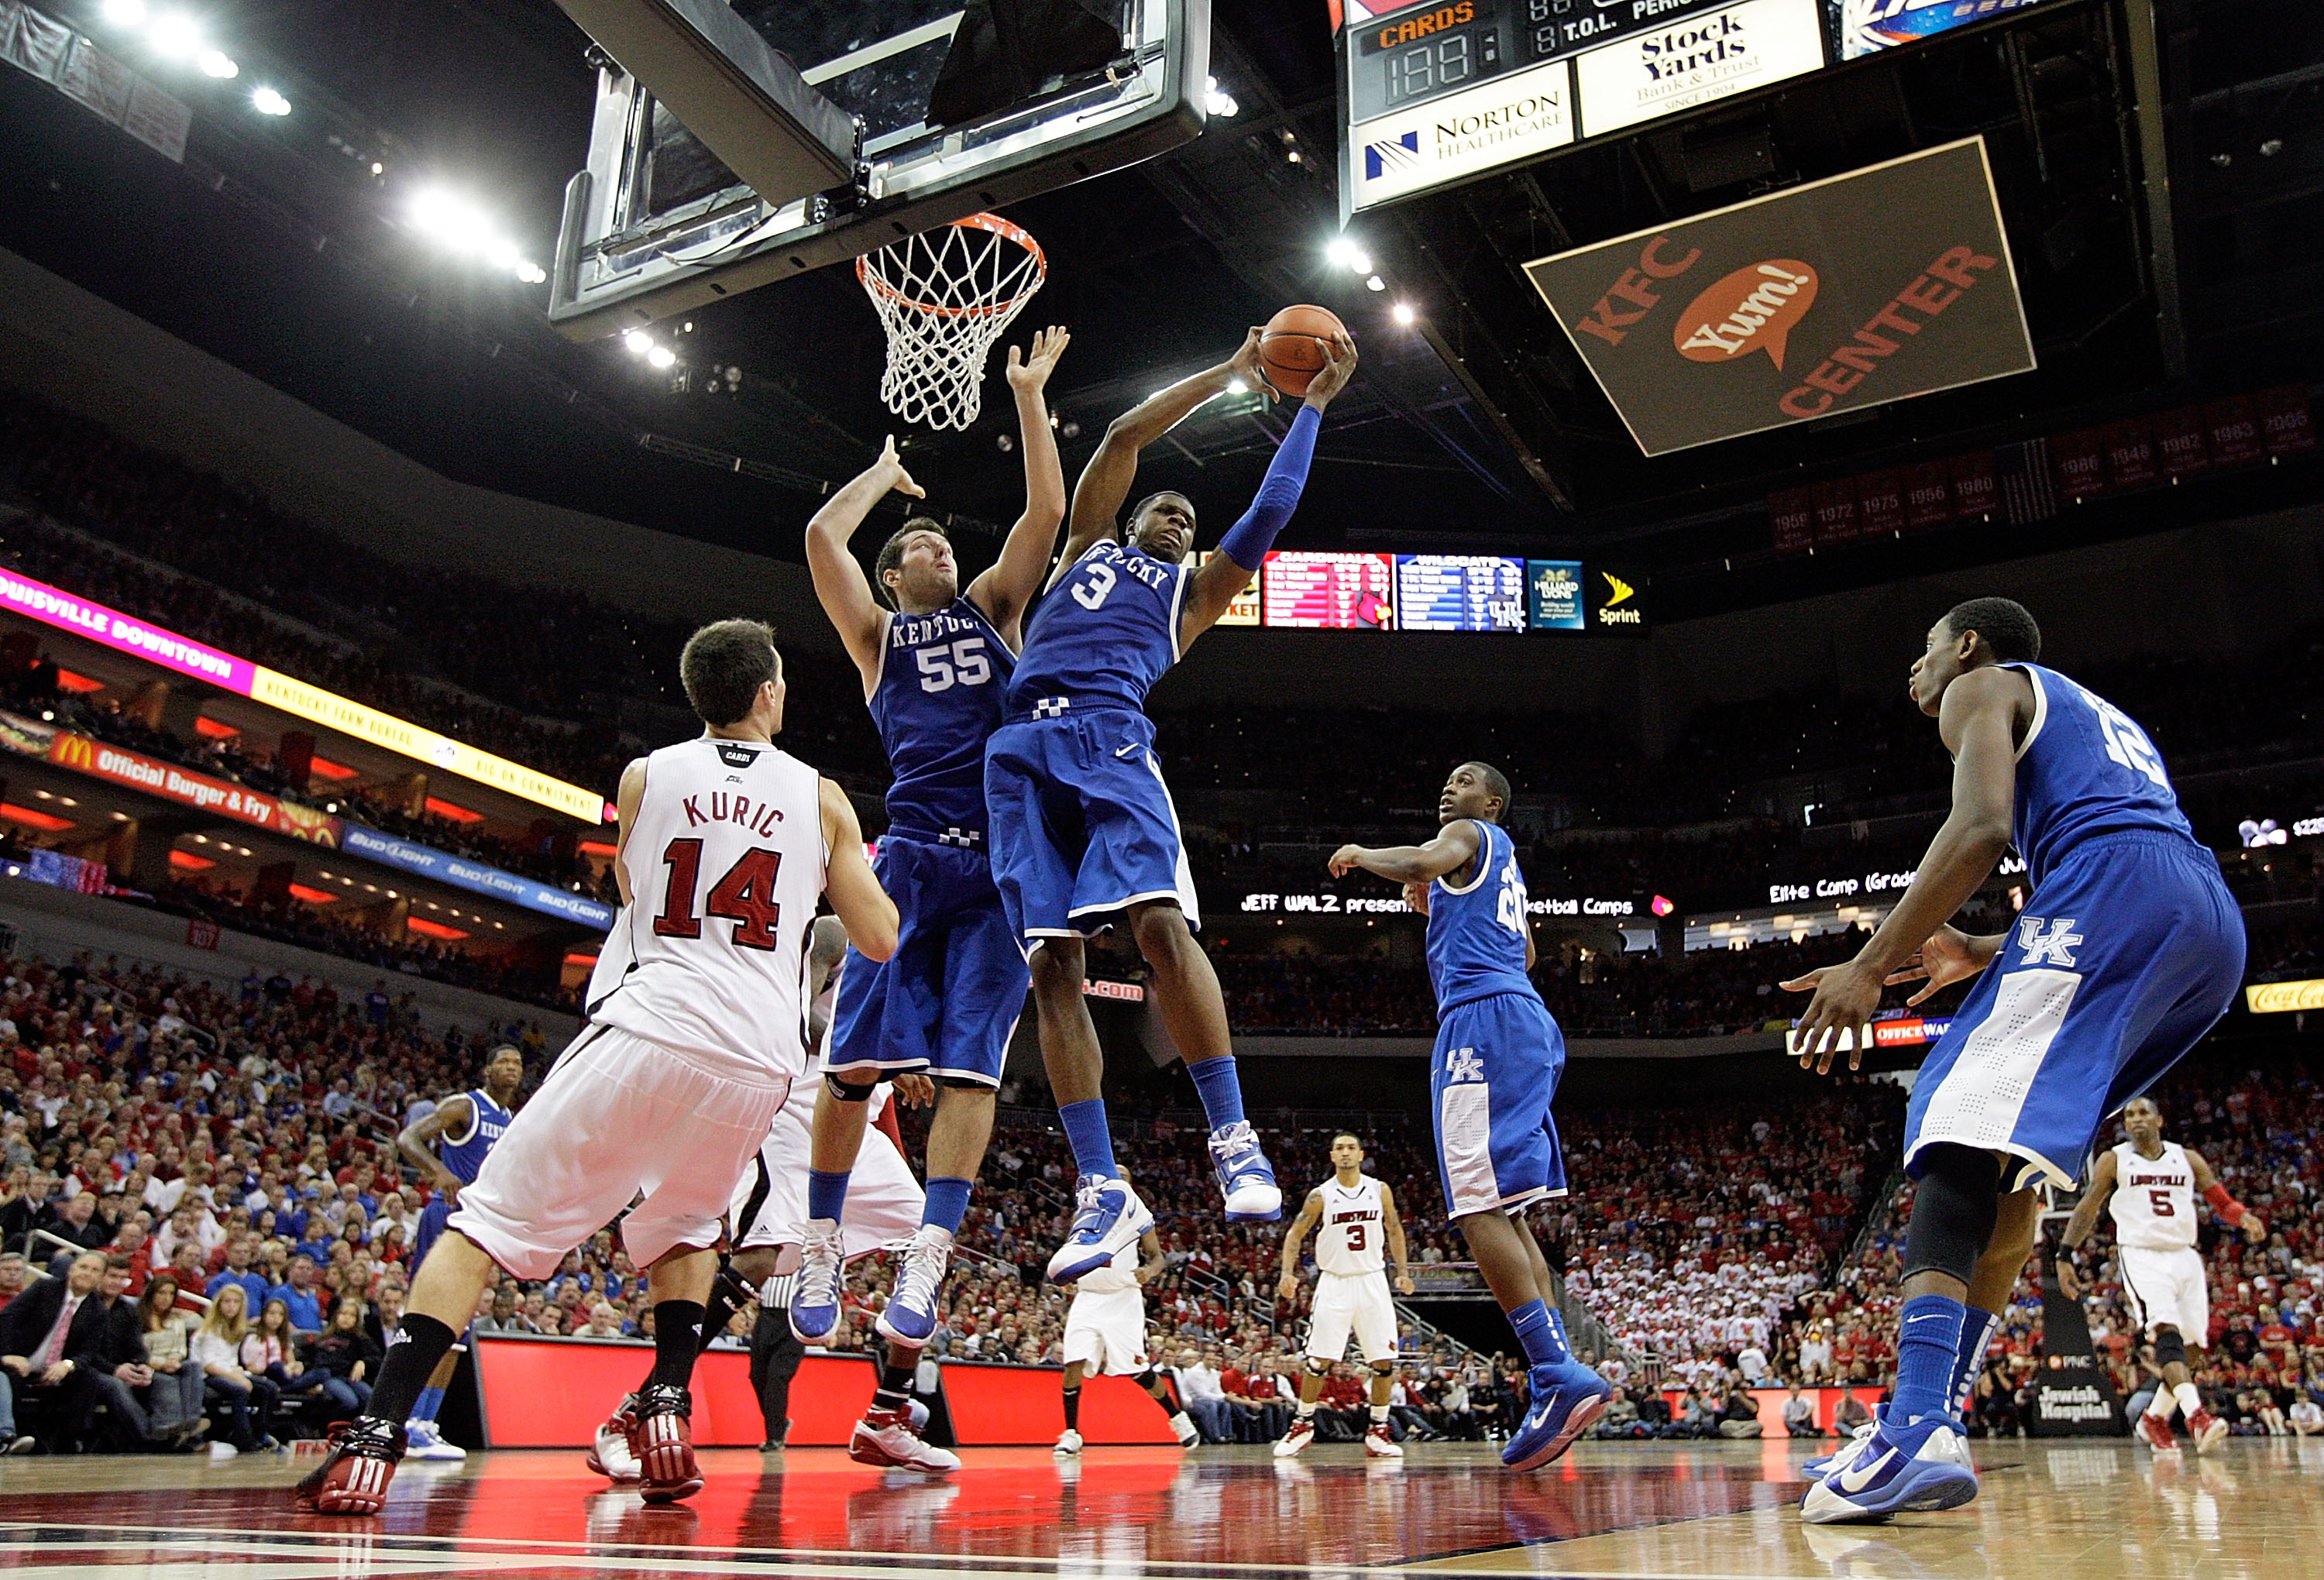 LOUISVILLE, KY - DECEMBER 31:  Terrence Jones #3 of the Kentucky Wildcats grabs a rebound during the game against the Louisville Cardinals at the KFC Yum! Center on December 31, 2010 in Louisville, Kentucky. Kentucky won 78-63.  (Photo by Andy Lyons/Getty